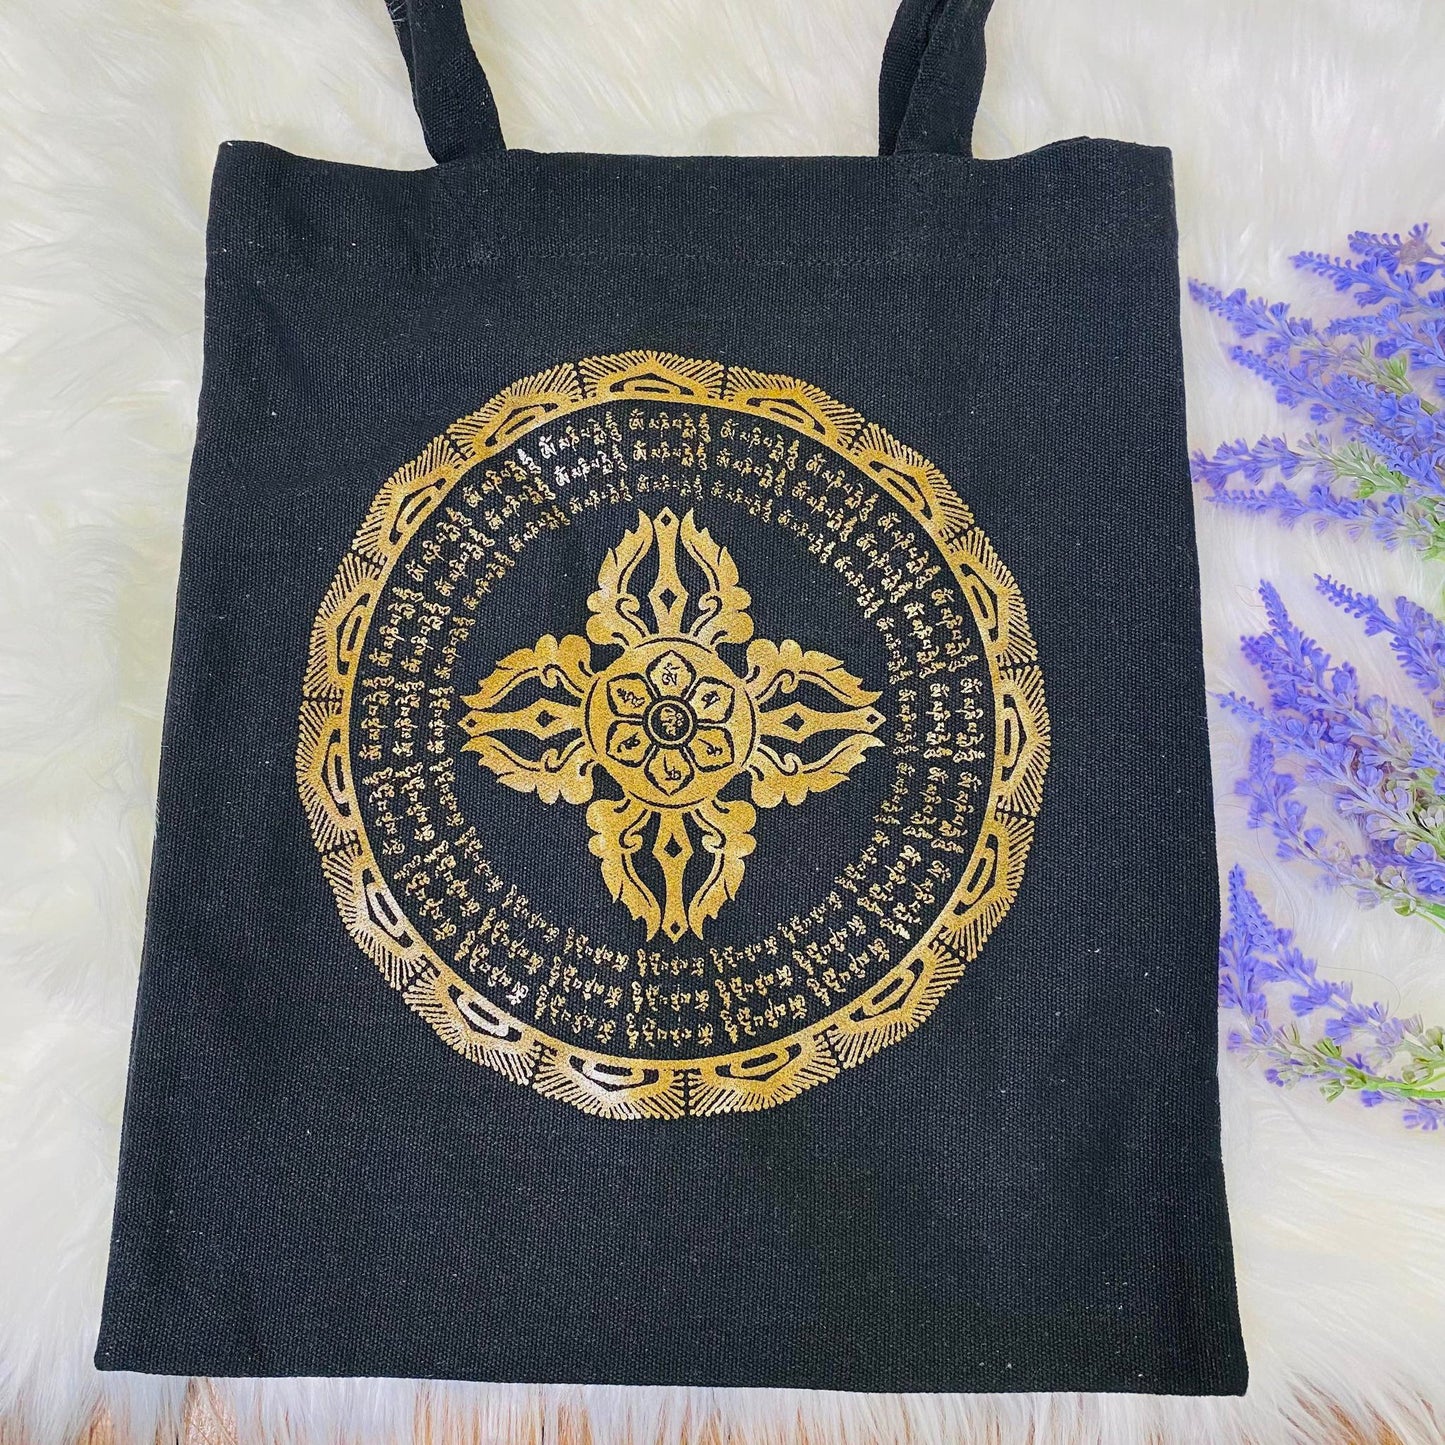 Organic Cotton Tote Bag, Vajra Design Bags, Shopping Bags, Ecofriendly Reusable Bag, Zippered Bag, Unisex Tote Bags, Gift For Him/Her